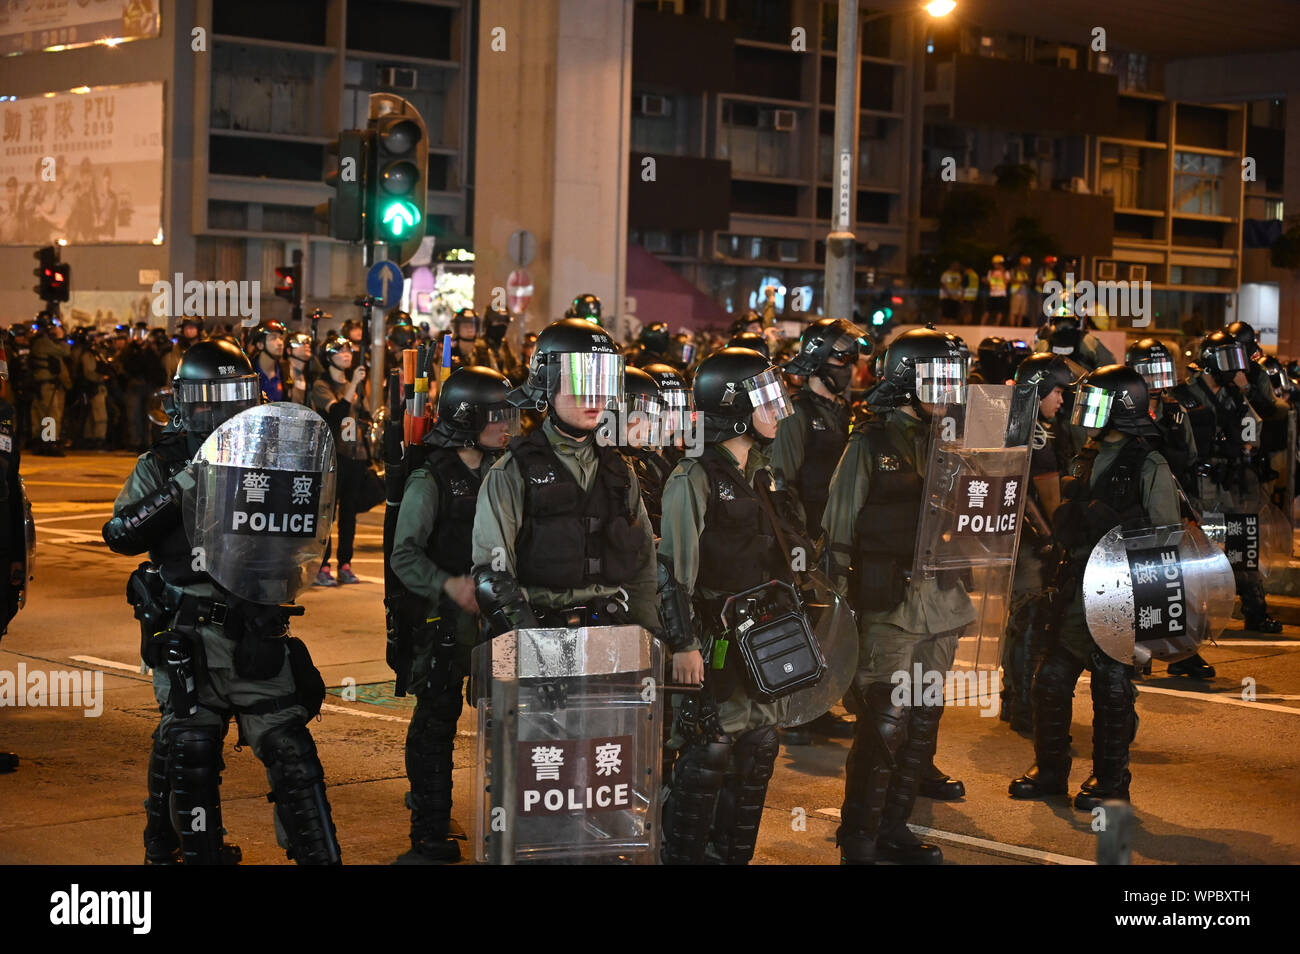 Hong Kong, China. 7th Sep 2019. Riot police stand on a corner in the Mong Kok area of Hong Kong on September 7, 2019, in order to clear crowds of protesters. Police and demonstrators have squared off with increasing frequency and violence as the summer has gone on. Photo by Thomas Maresca/UPI Credit: UPI/Alamy Live News Stock Photo